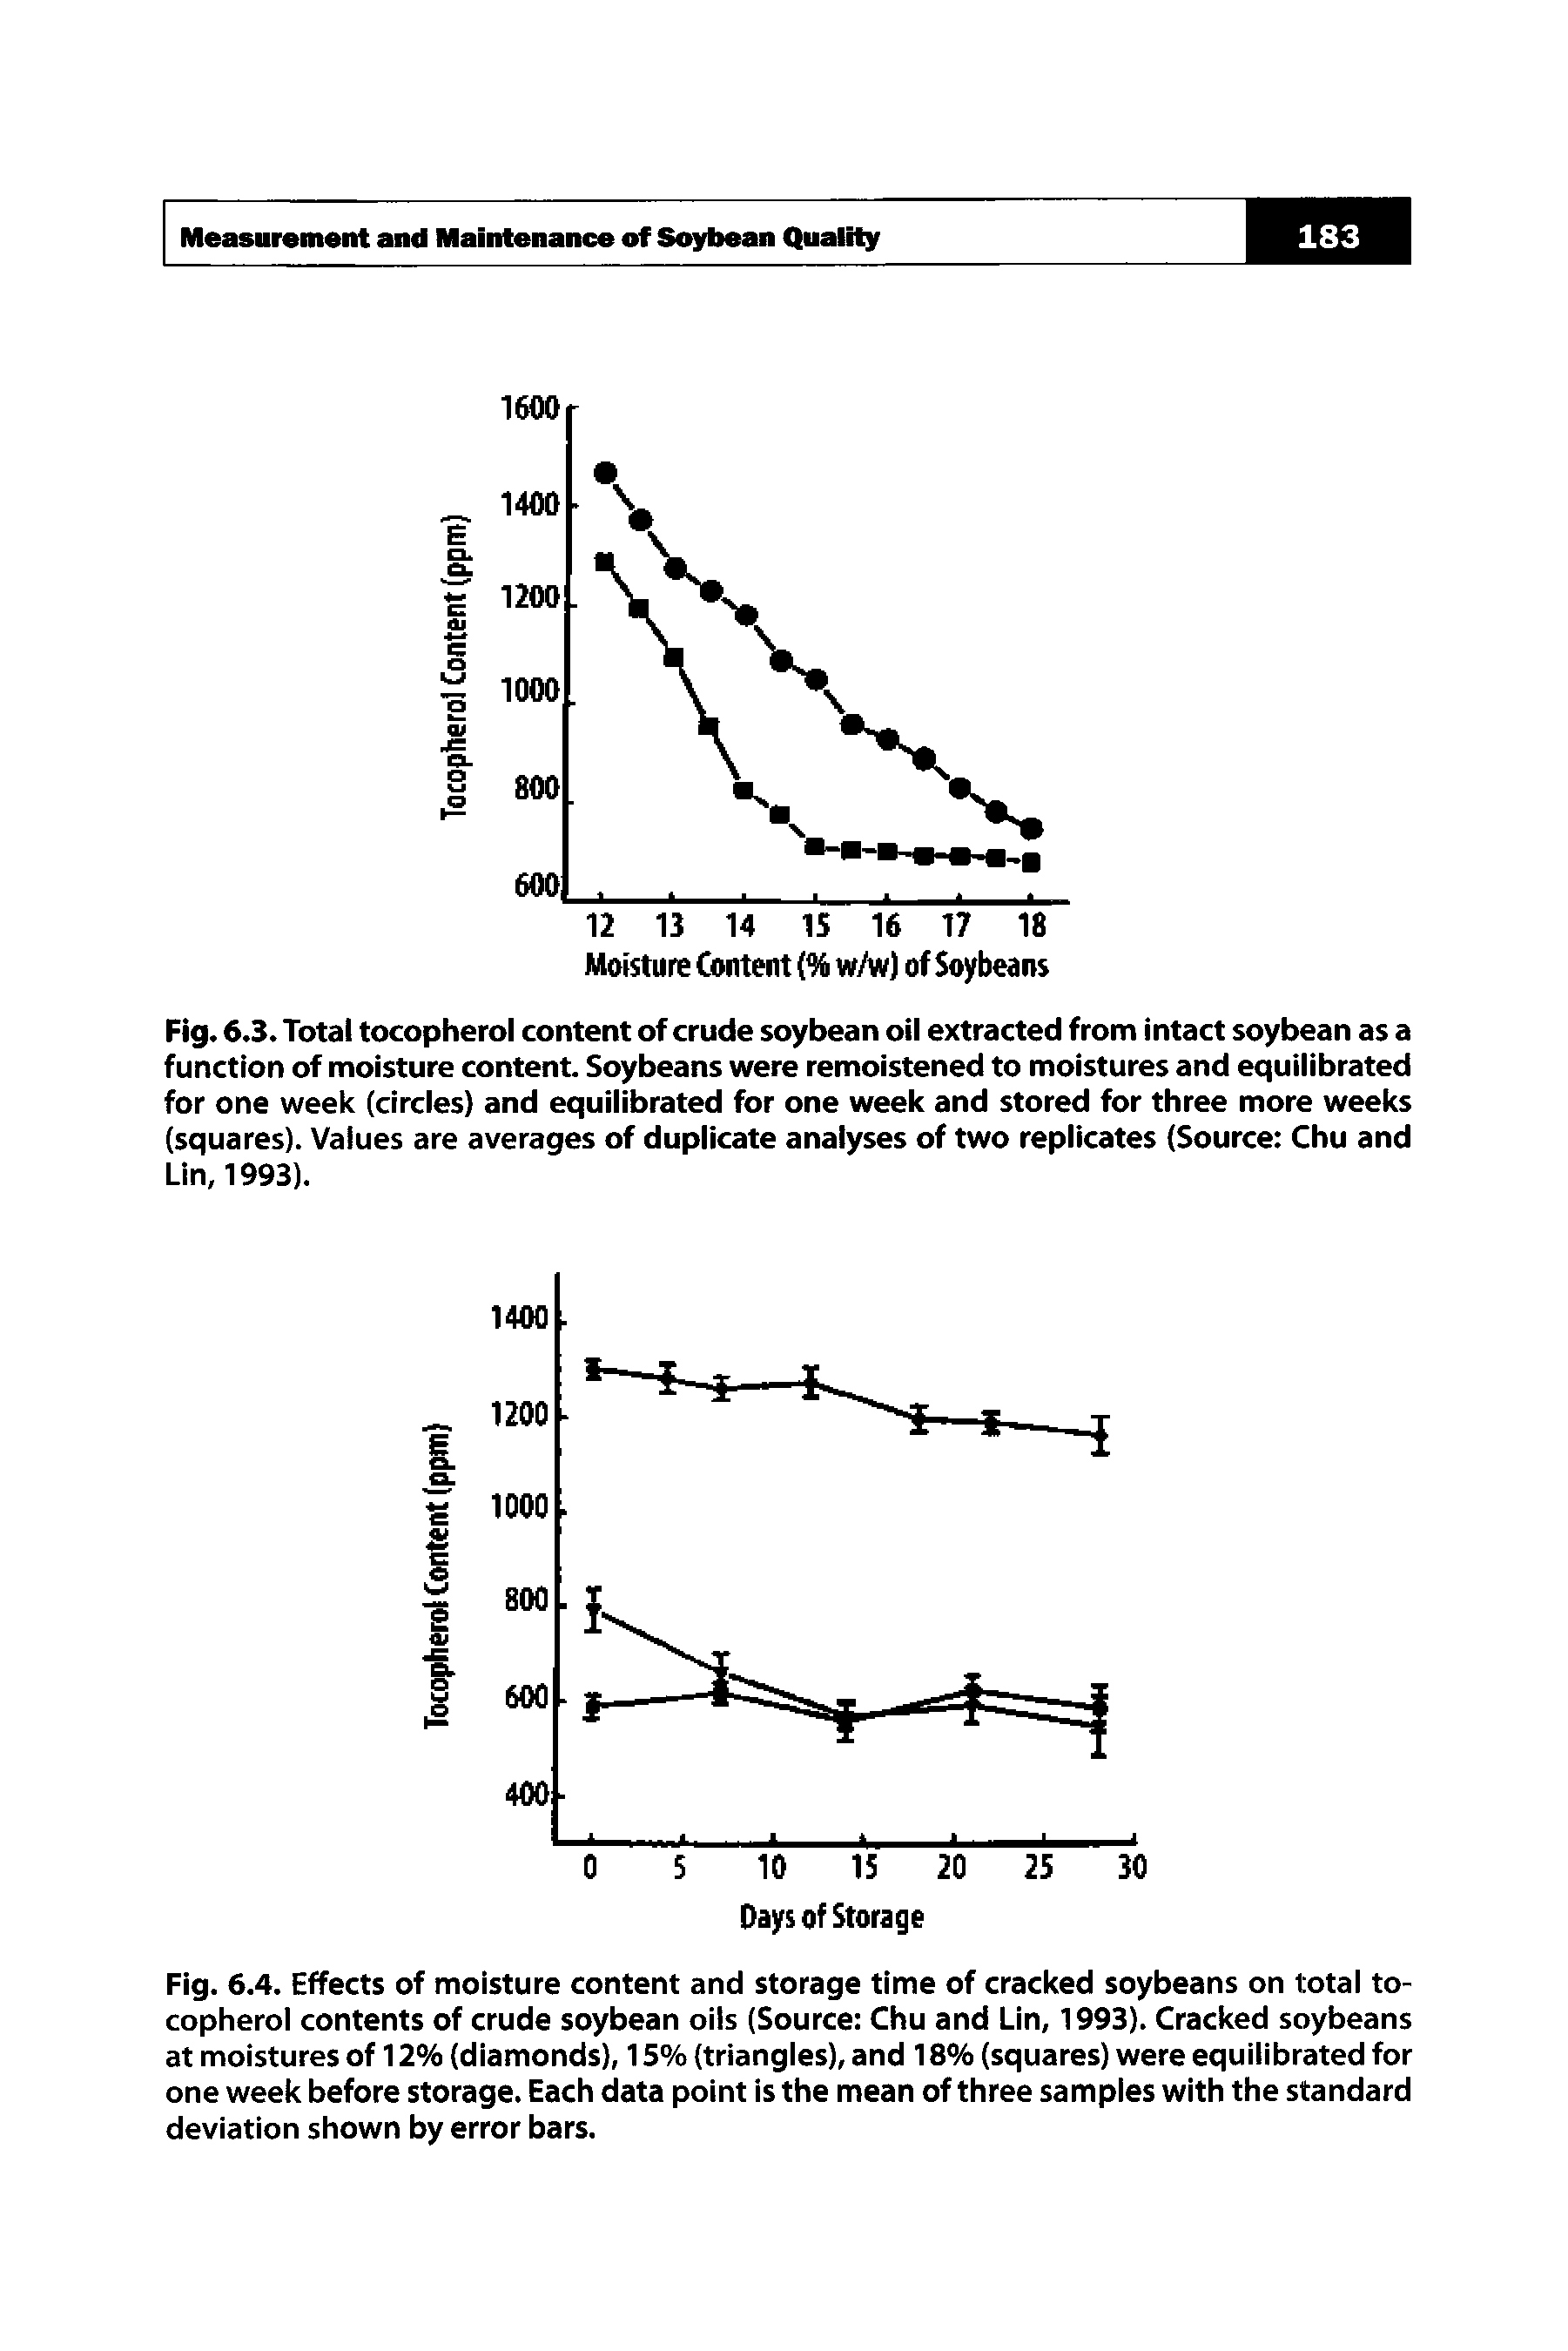 Fig. 6.4. Effects of moisture content and storage time of cracked soybeans on total tocopherol contents of crude soybean oils (Source Chu and Lin, 1993). Cracked soybeans at moistures of 12% (diamonds), 15% (triangles), and 18% (squares) were equilibrated for one week before storage. Each data point is the mean of three samples with the standard deviation shown by error bars.